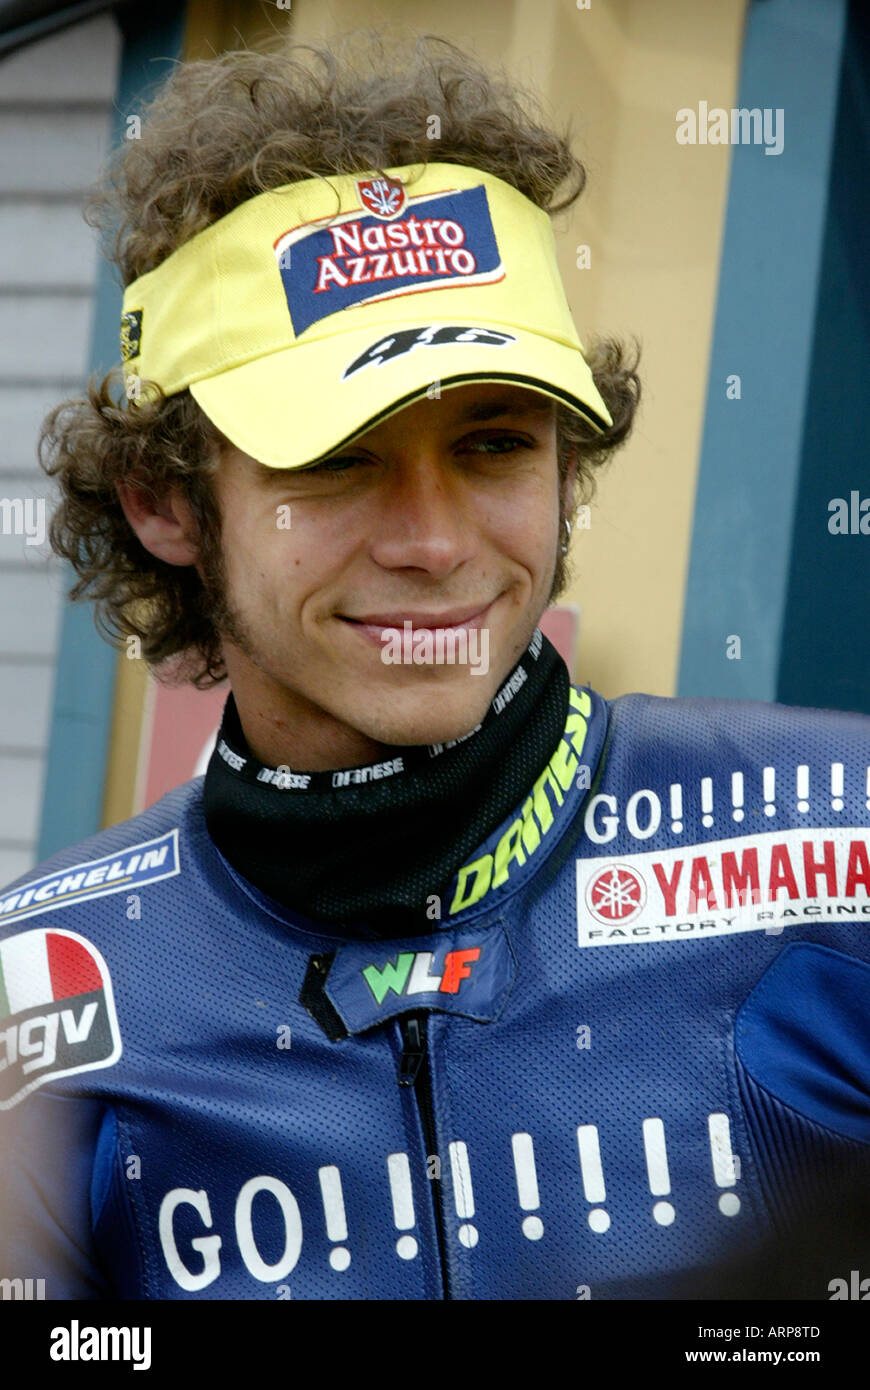 Valentino Rossi, nine times World motorcycle champion in his Yamaha race leathers pictured in 2004 at British Grand Prix, Donnington Stock Photo